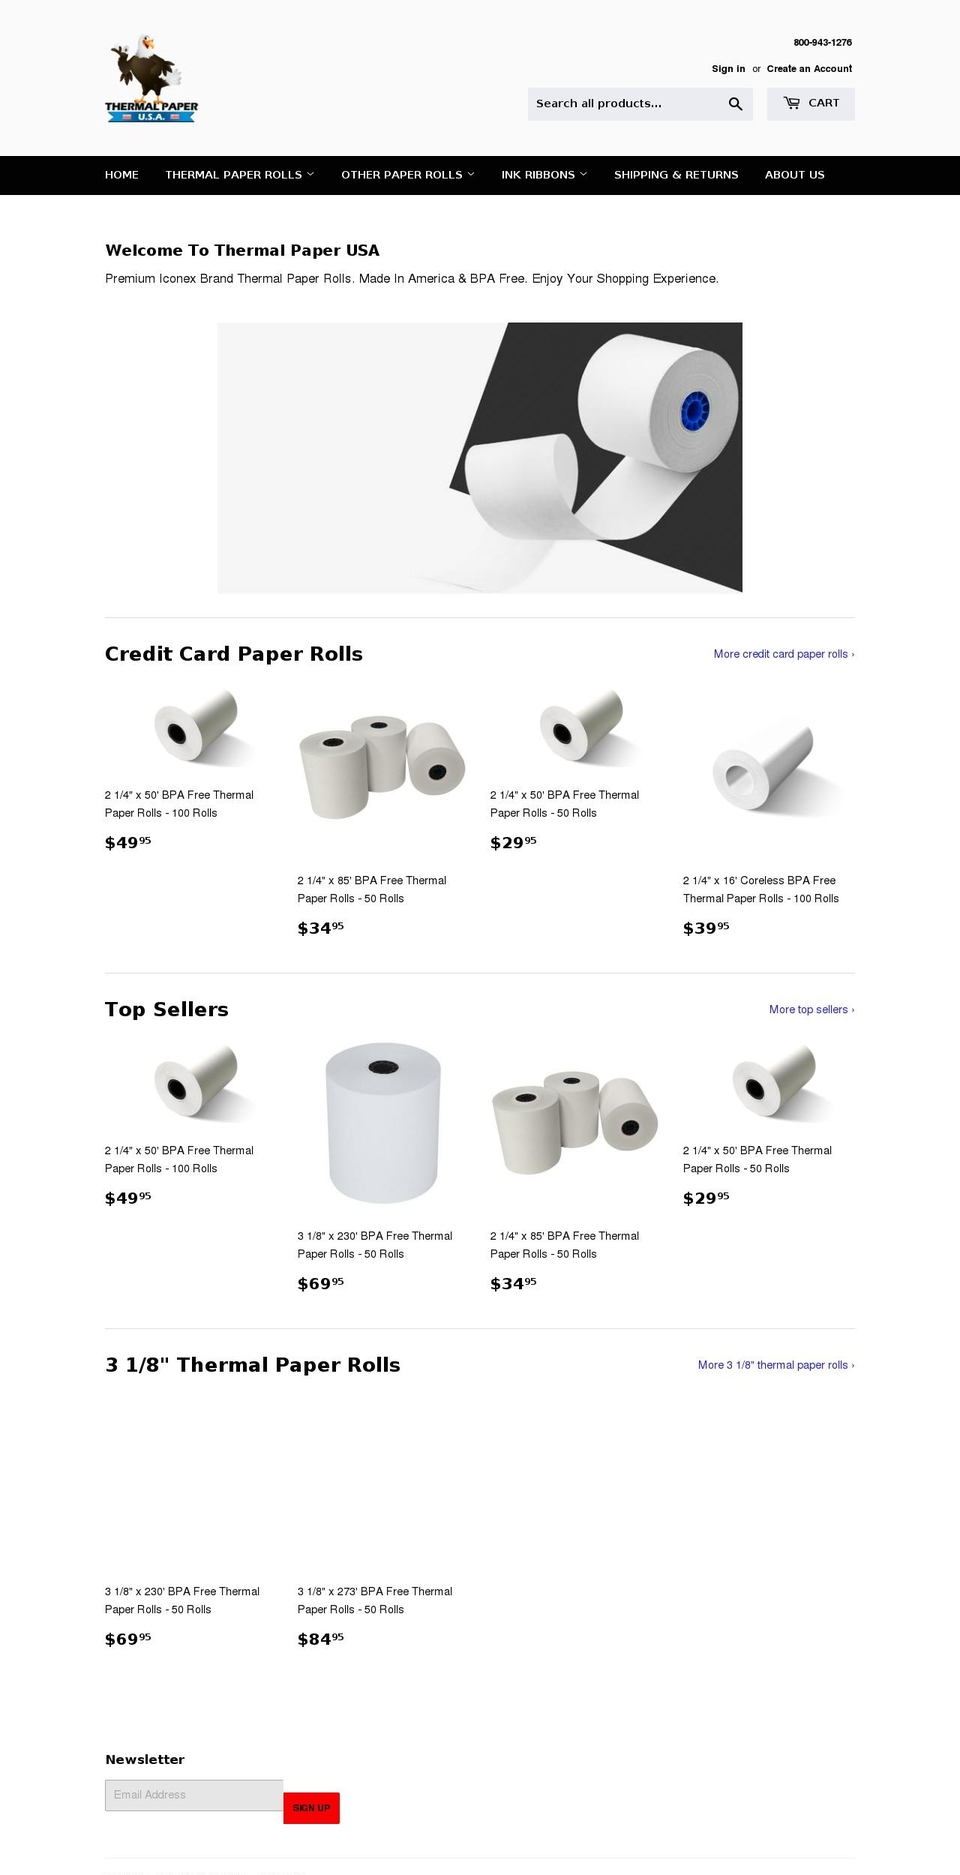 qeretail Shopify theme site example thermalpaperusa.com